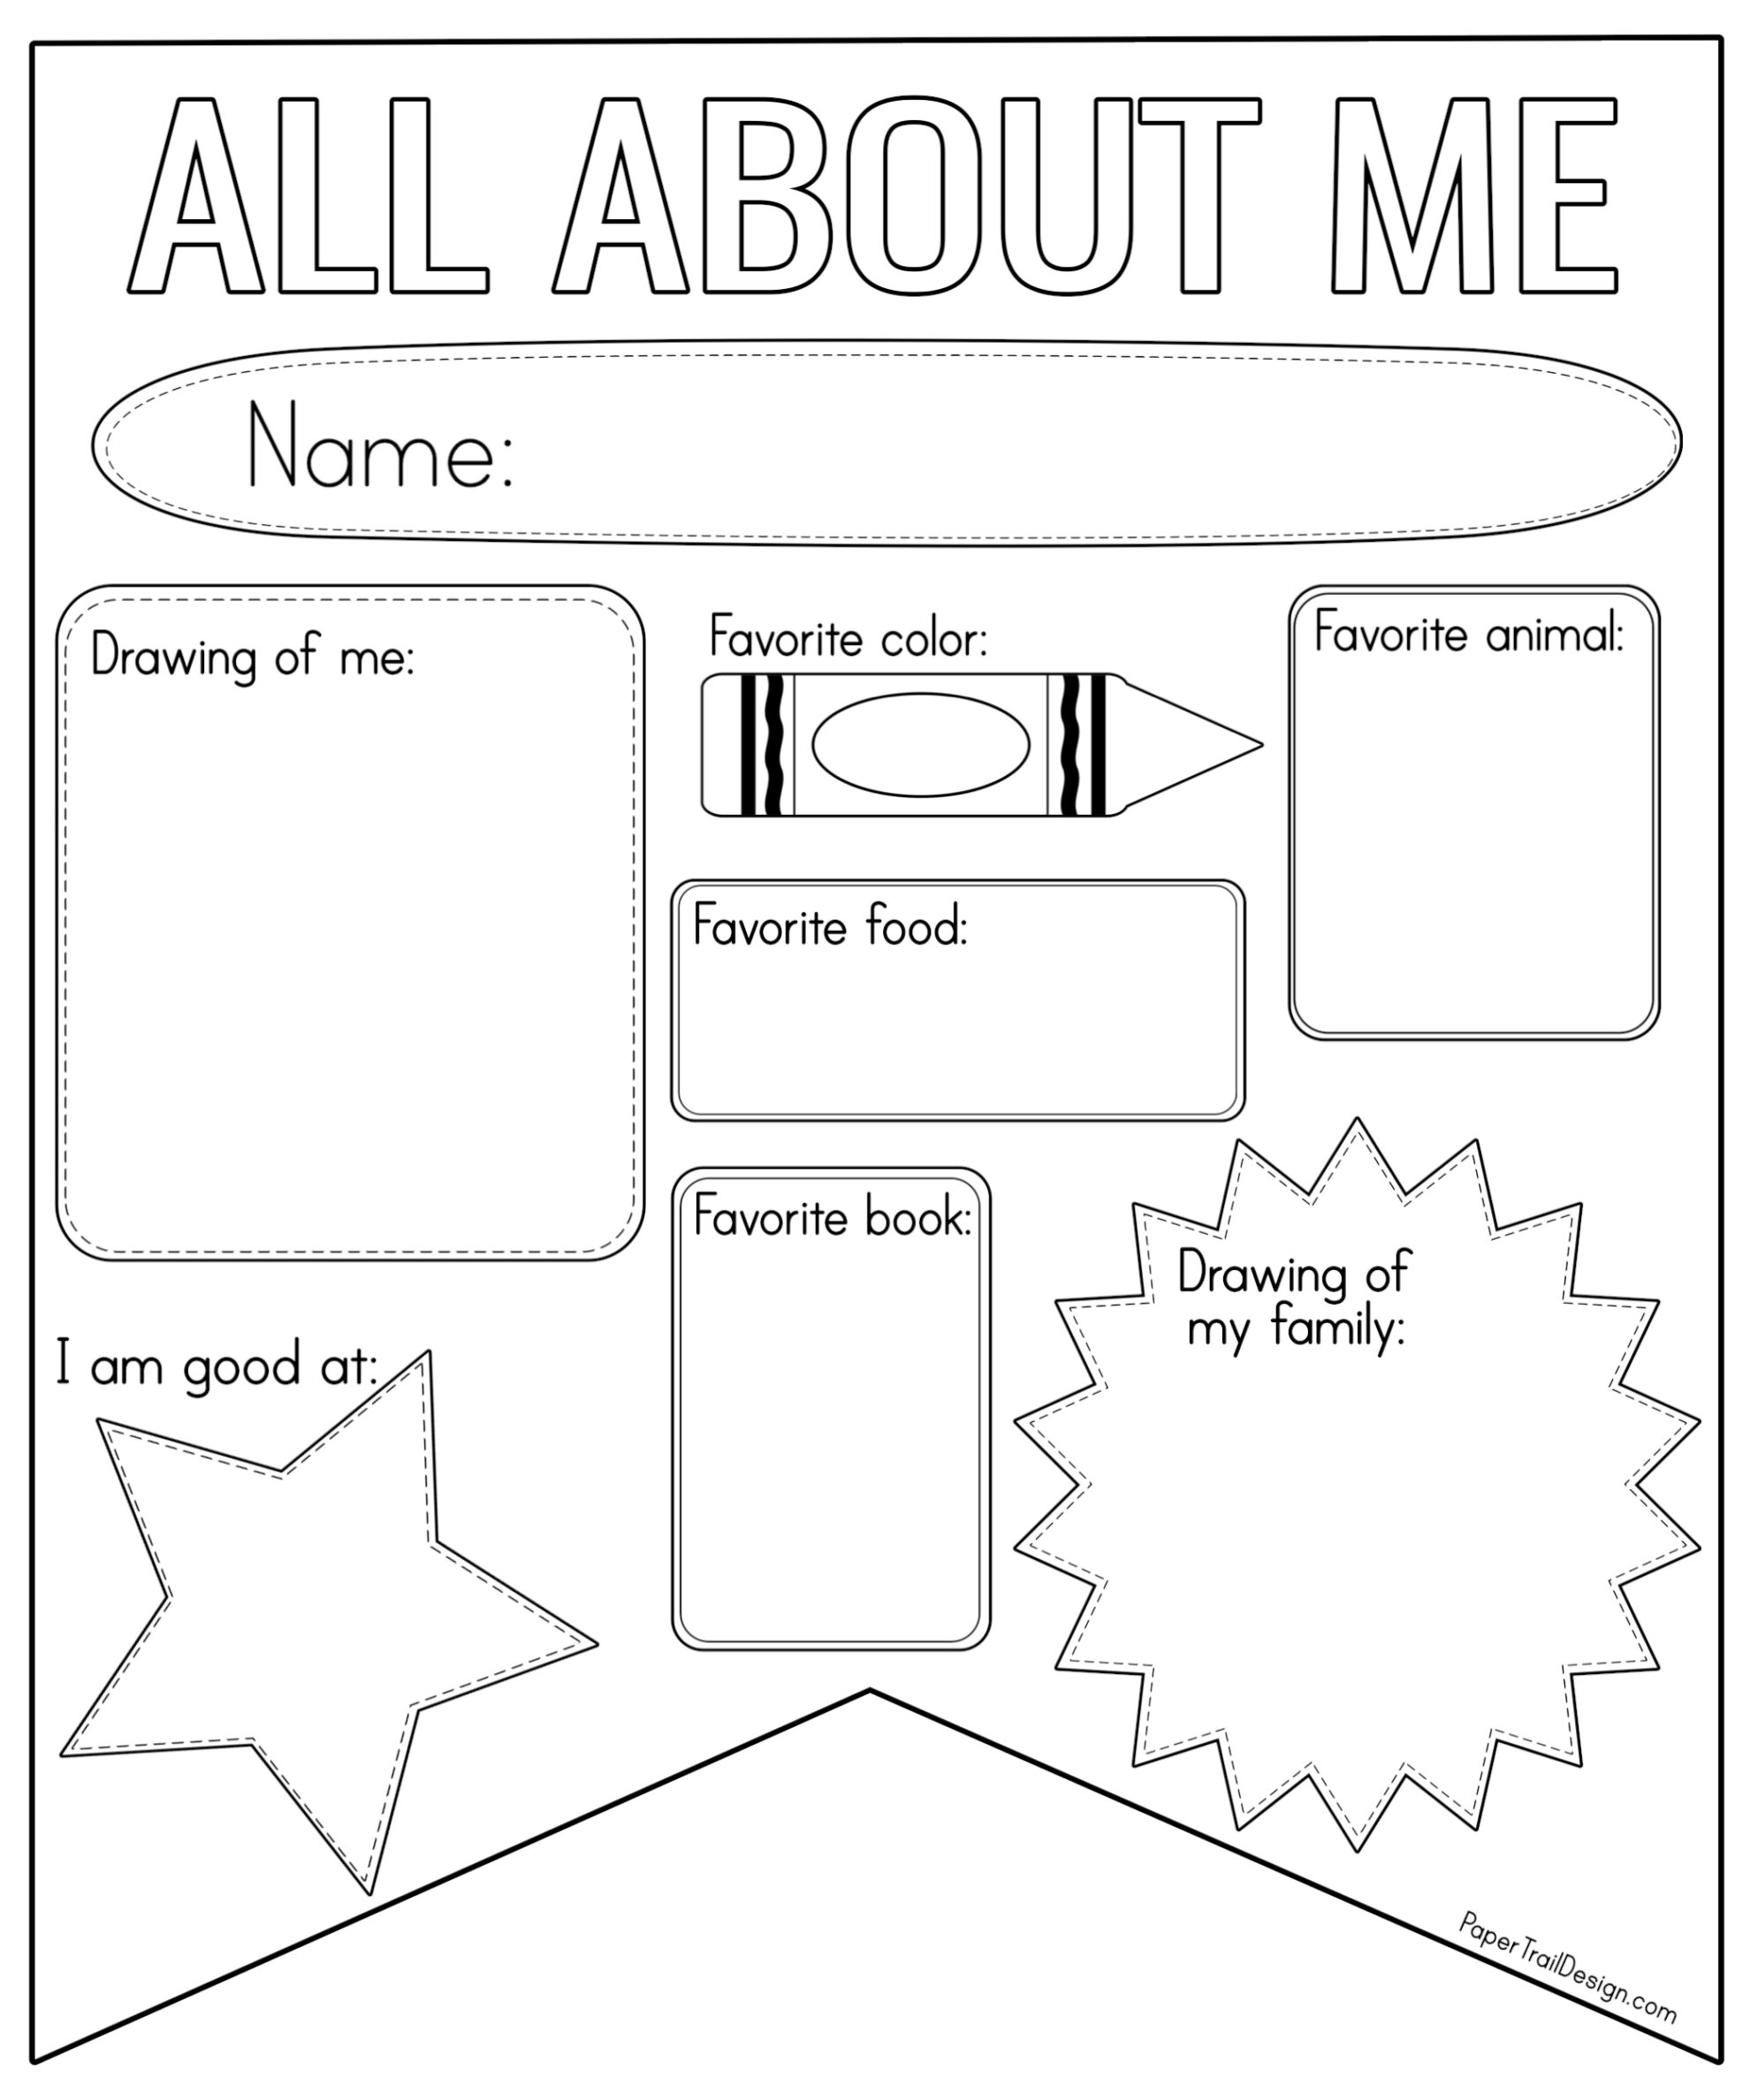 All About Me Paper Free Printable Get What You Need For Free